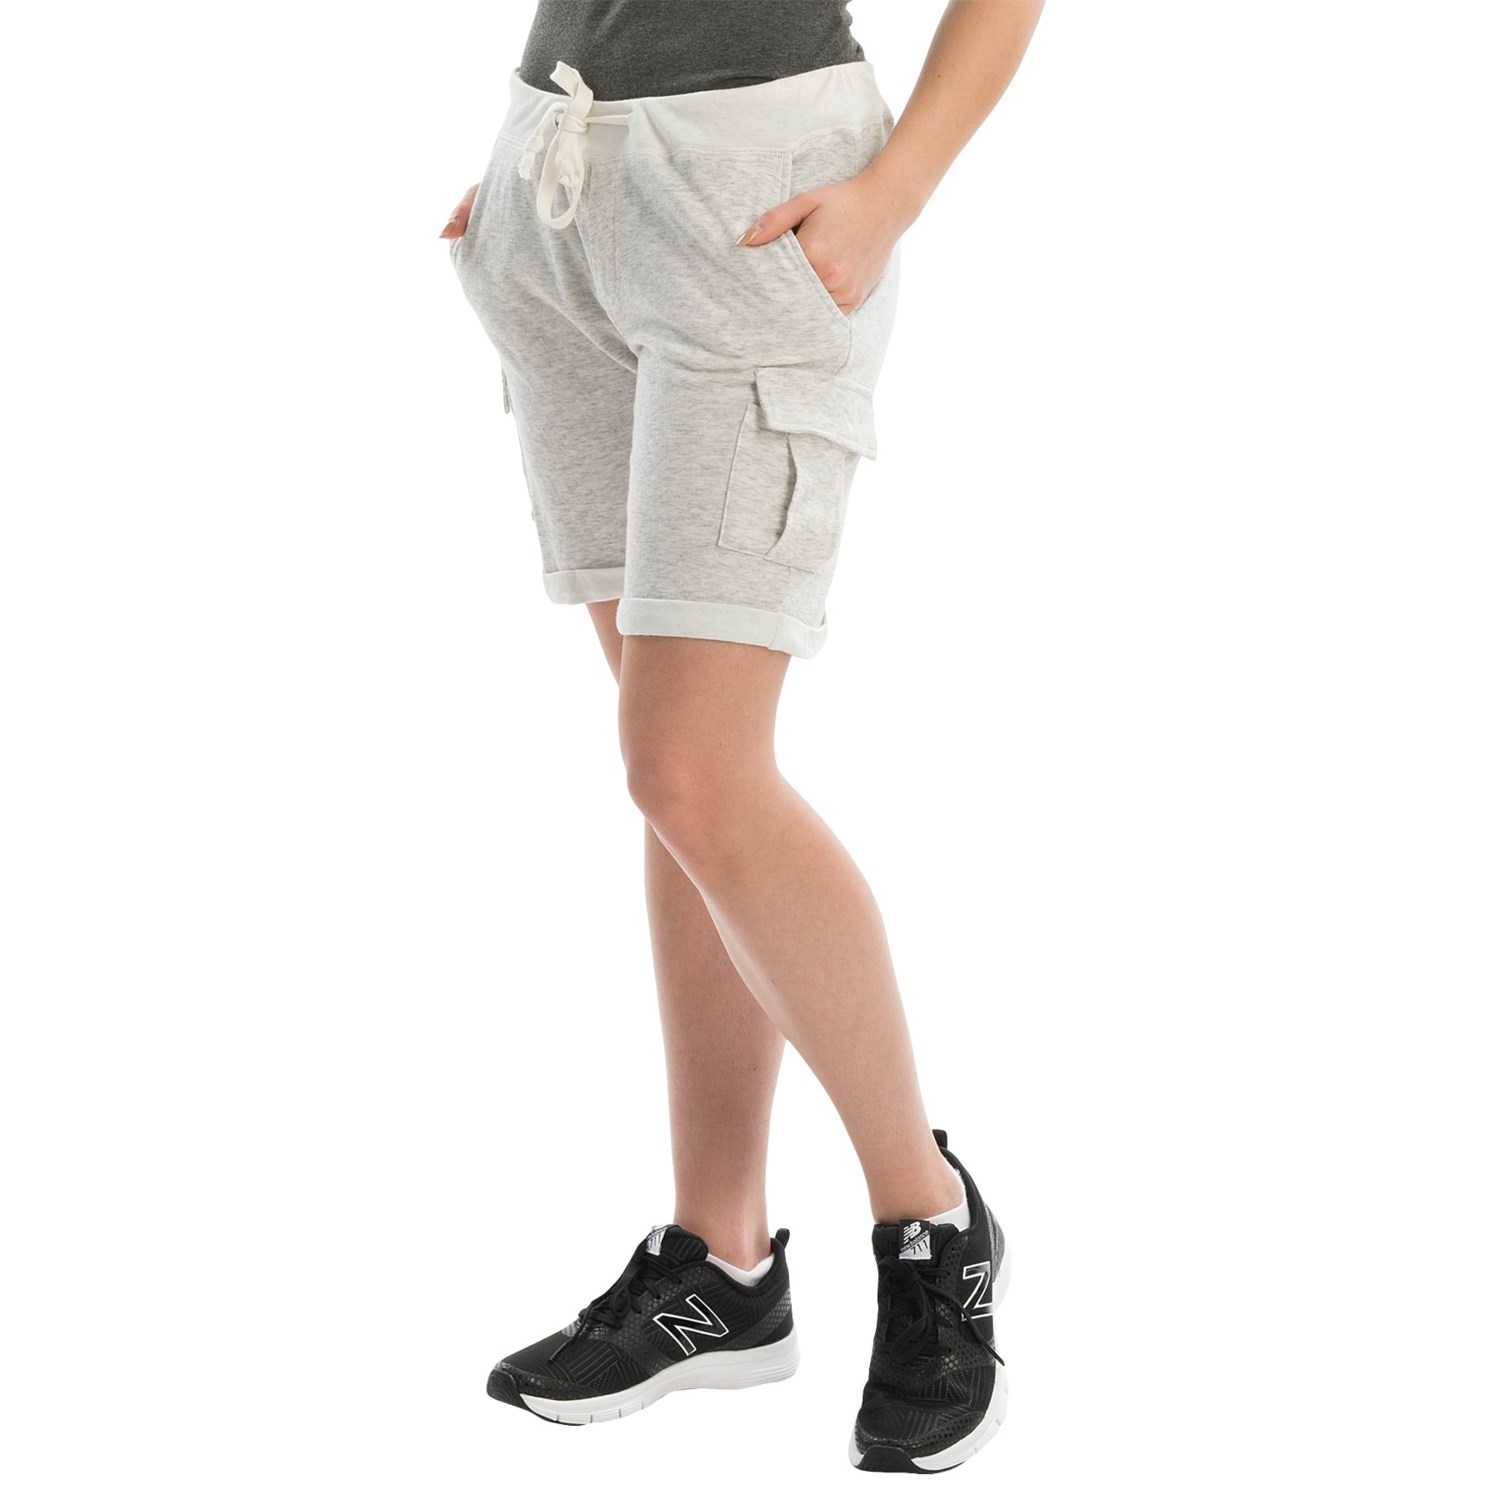 Philosophy Heathered Knit Cargo Shorts (For Women)